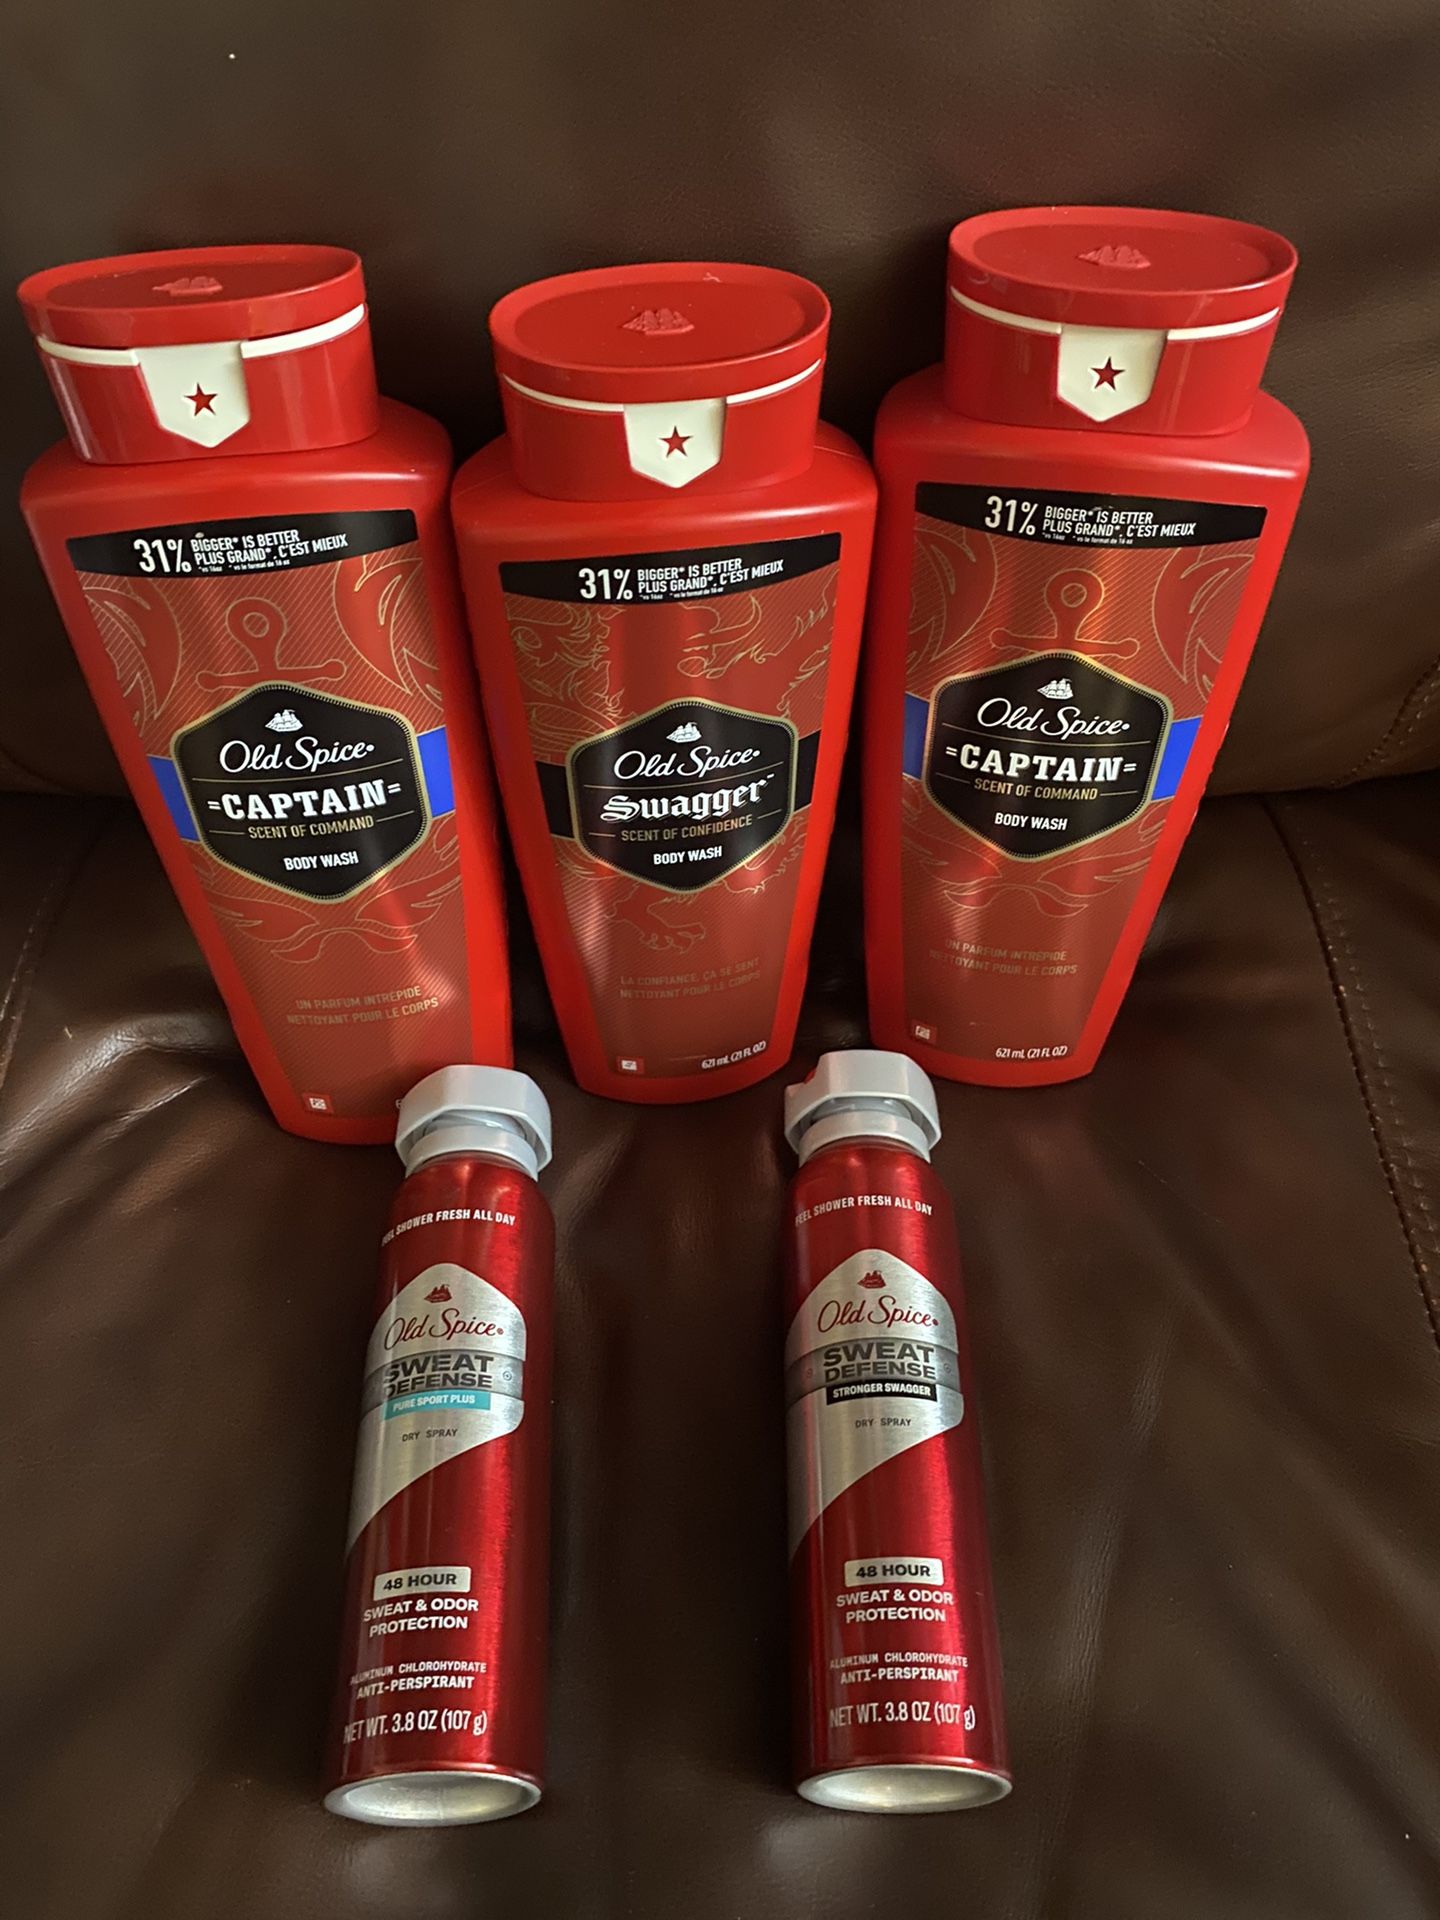 Old spice body wash and spray bundle